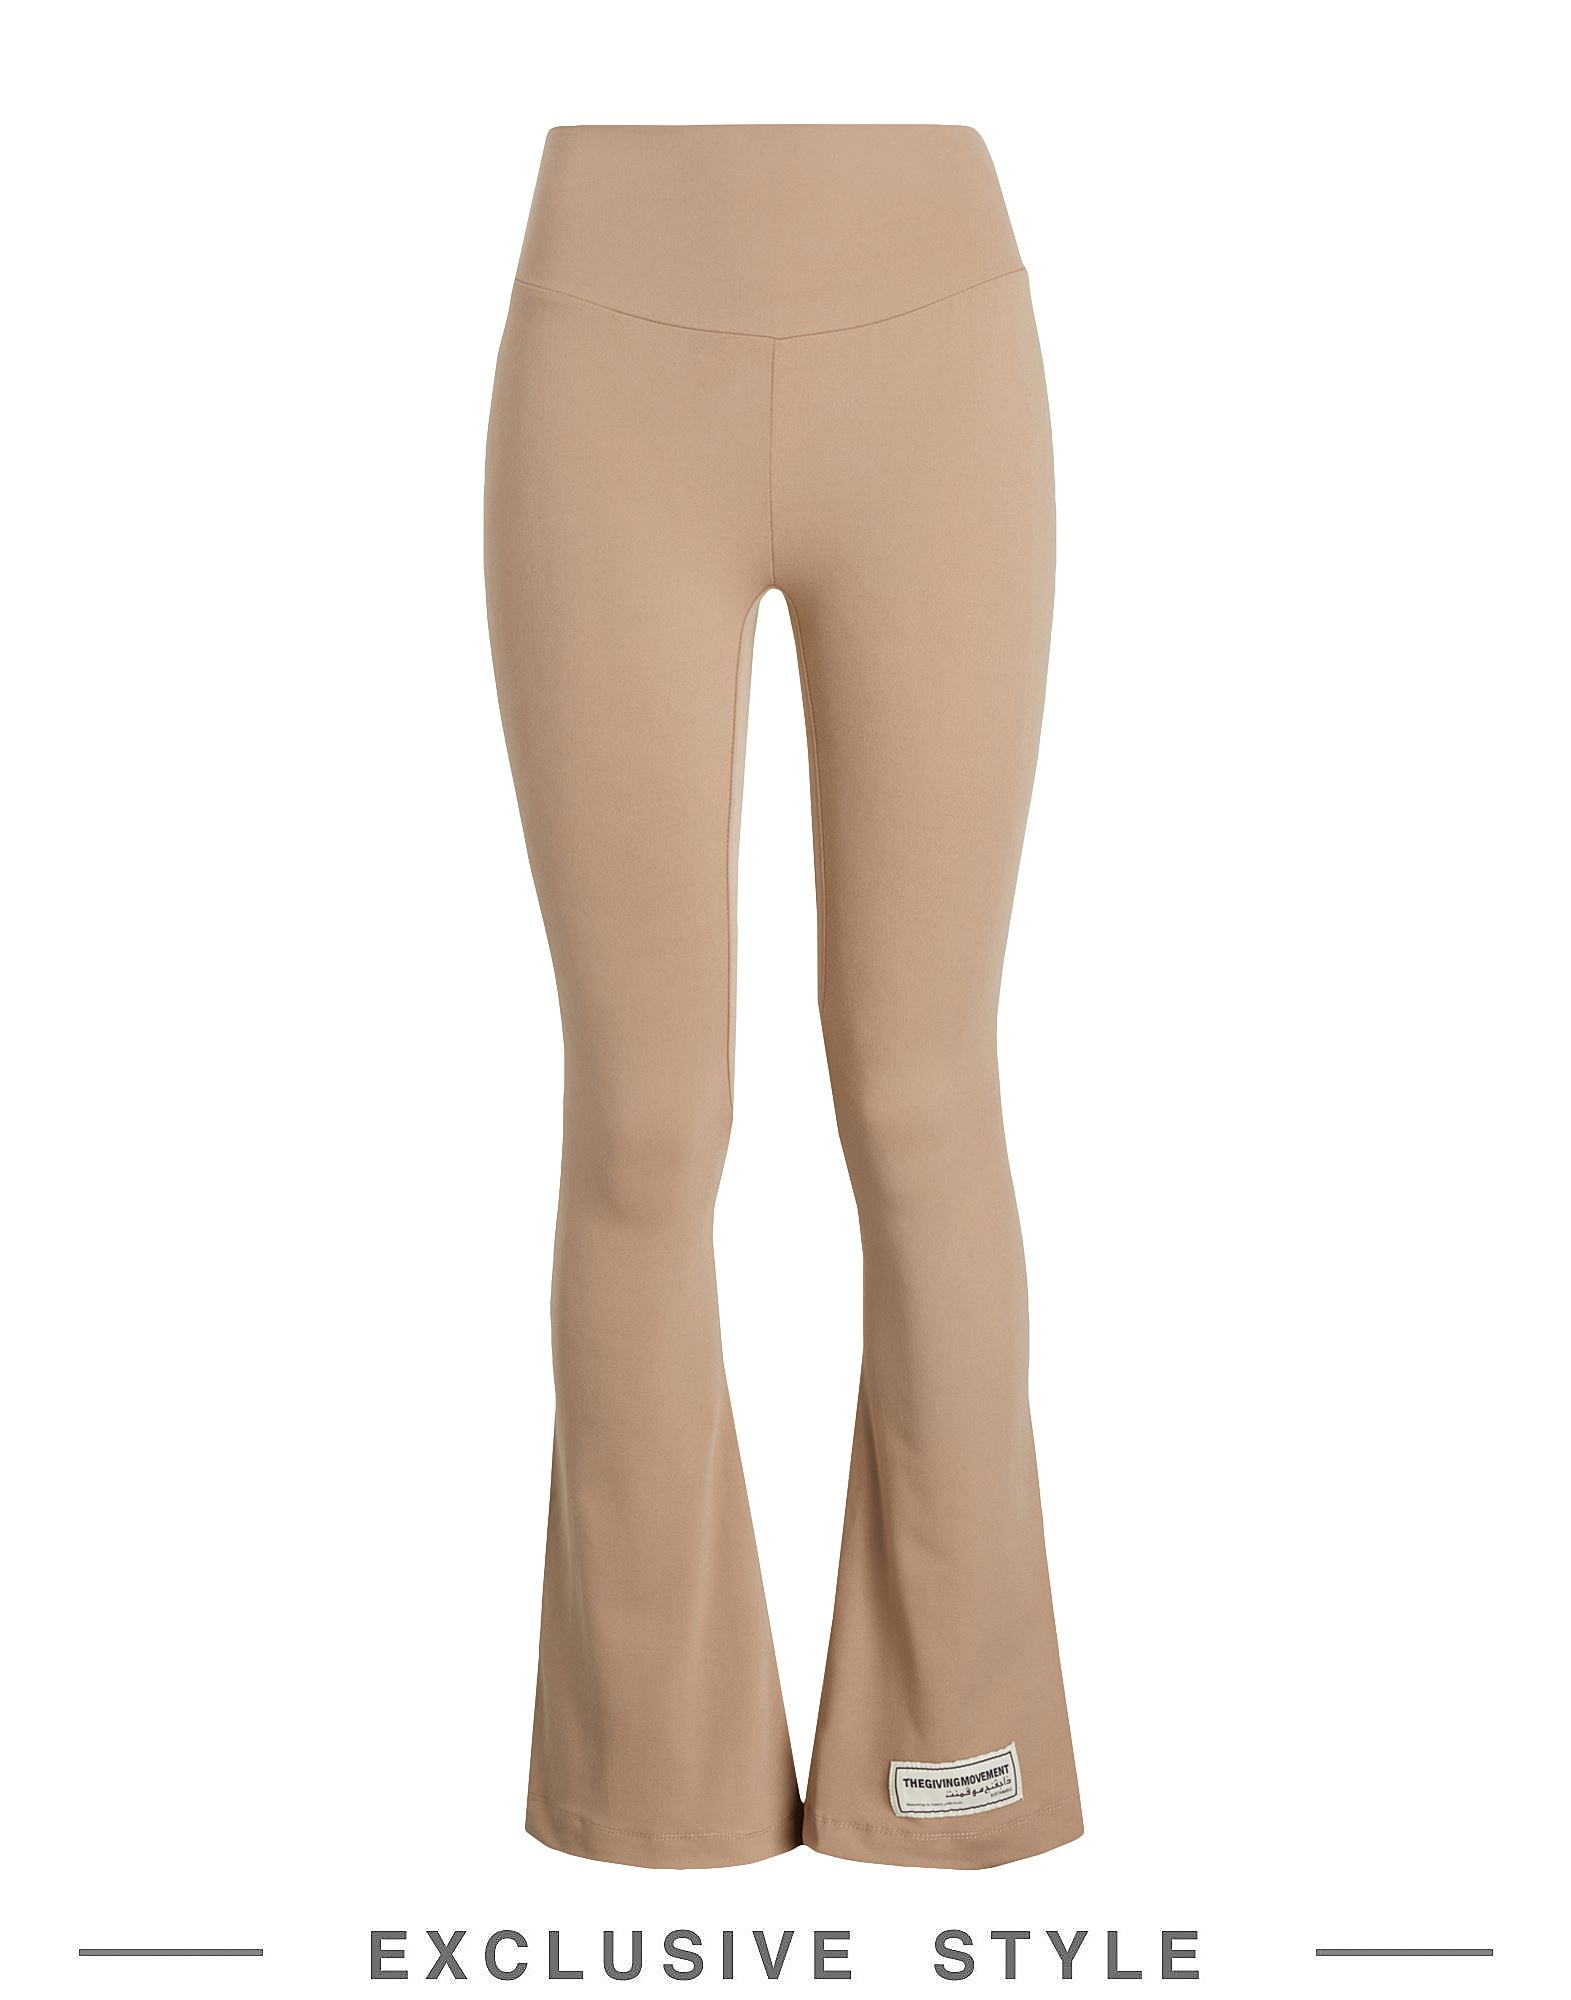 THE GIVING MOVEMENT X YOOX THE GIVING MOVEMENT X YOOX WOMAN PANTS LIGHT BROWN SIZE L RECYCLED POLYESTER, RECYCLED ELASTANE